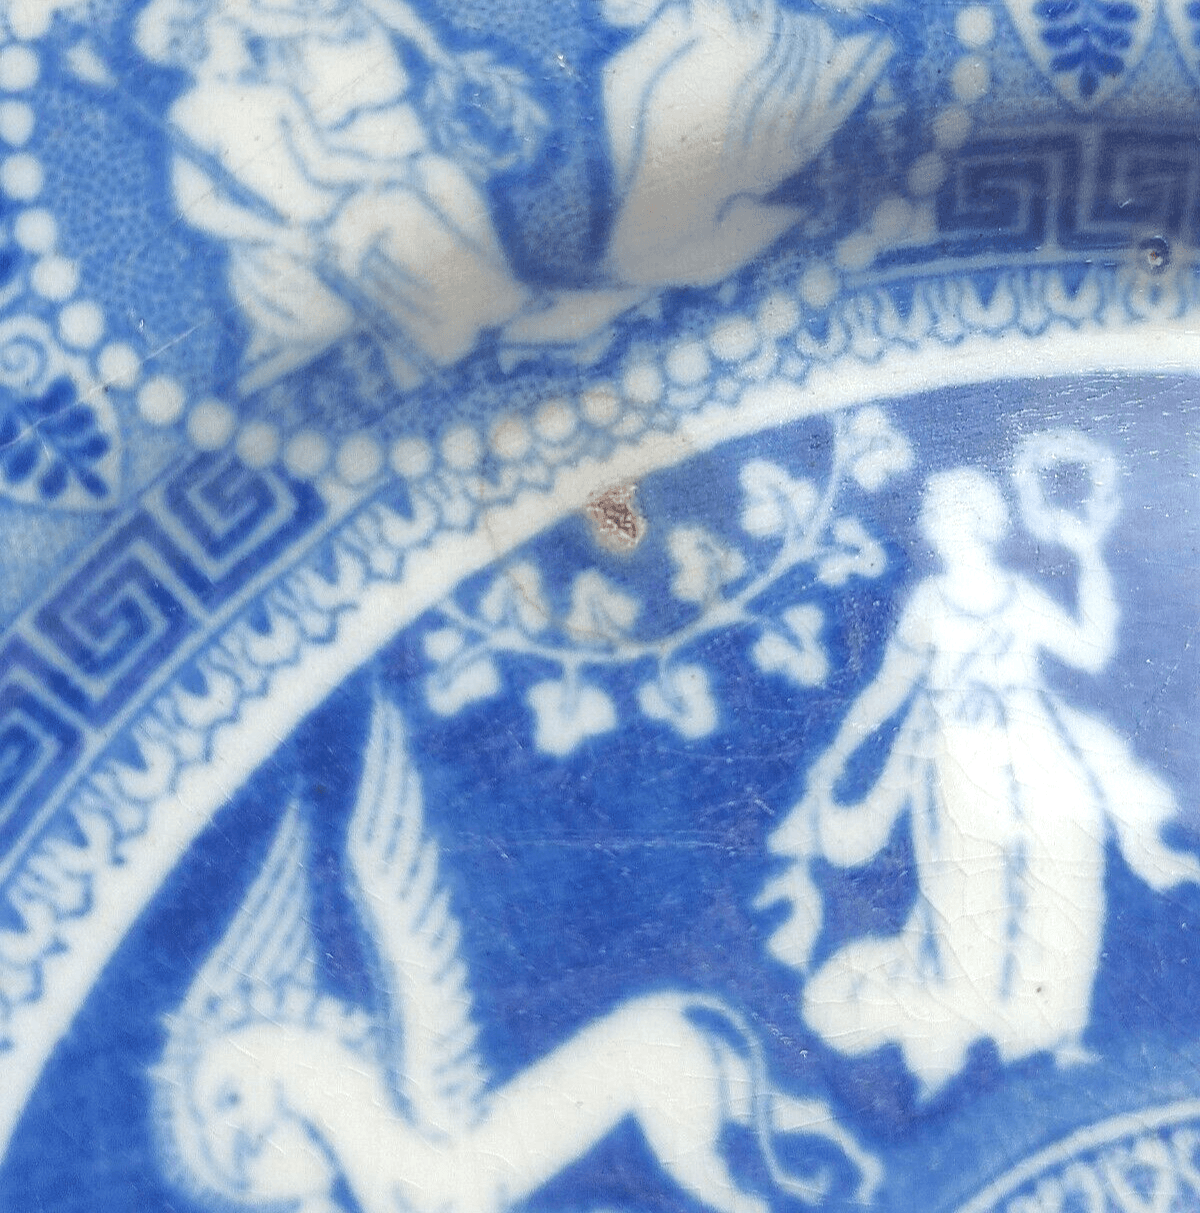 19th Century English Herculaneum Greek Neoclassical Antique Pottery Plate (2) - Tommy's Treasure